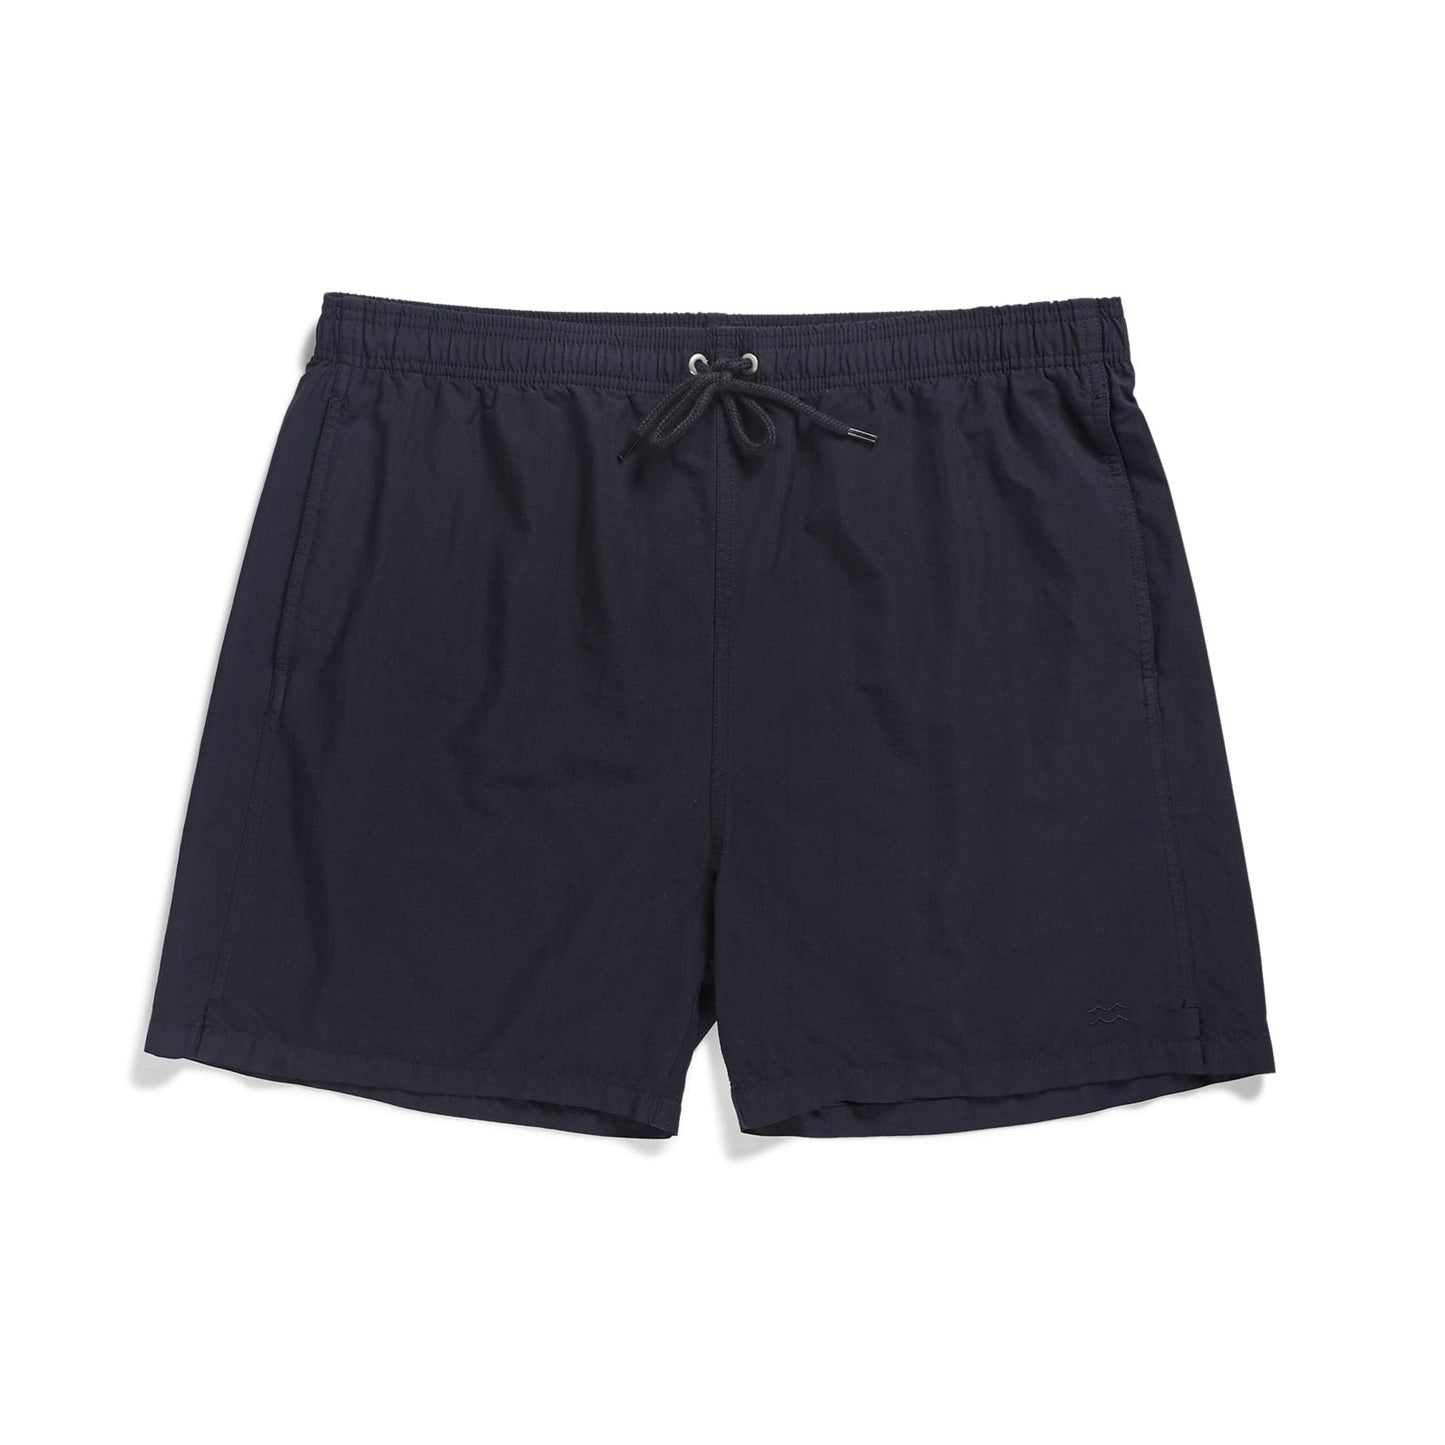 Norse Projects Hague Swimmers